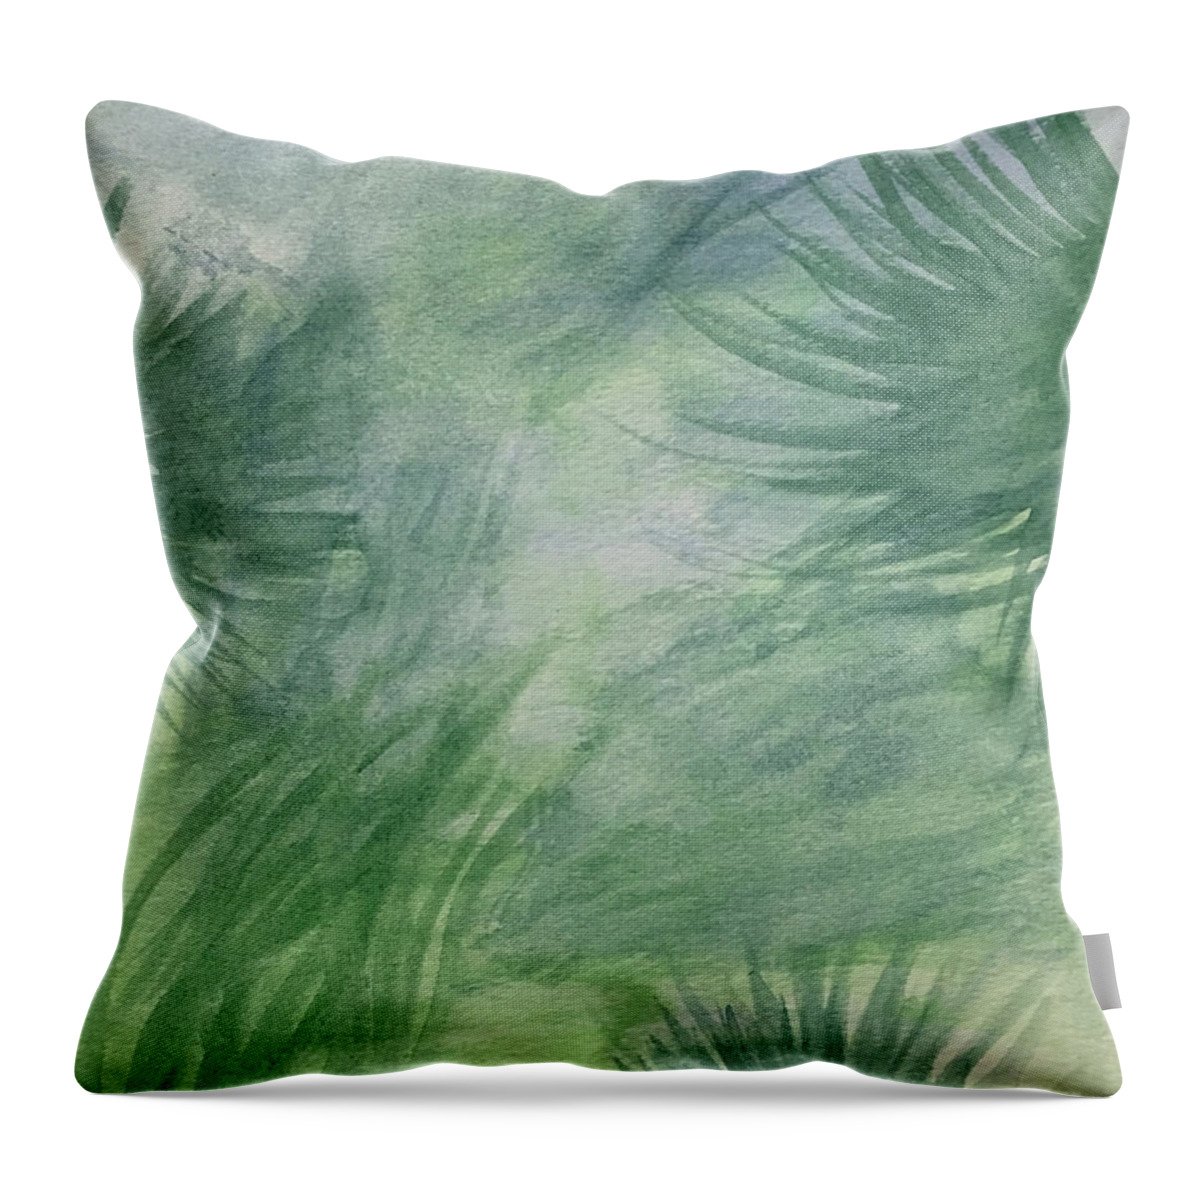 Beach Collection Breeze 1 By Annette M Stevenson Throw Pillow featuring the painting Beach Collection Breeze 1 by Annette M Stevenson